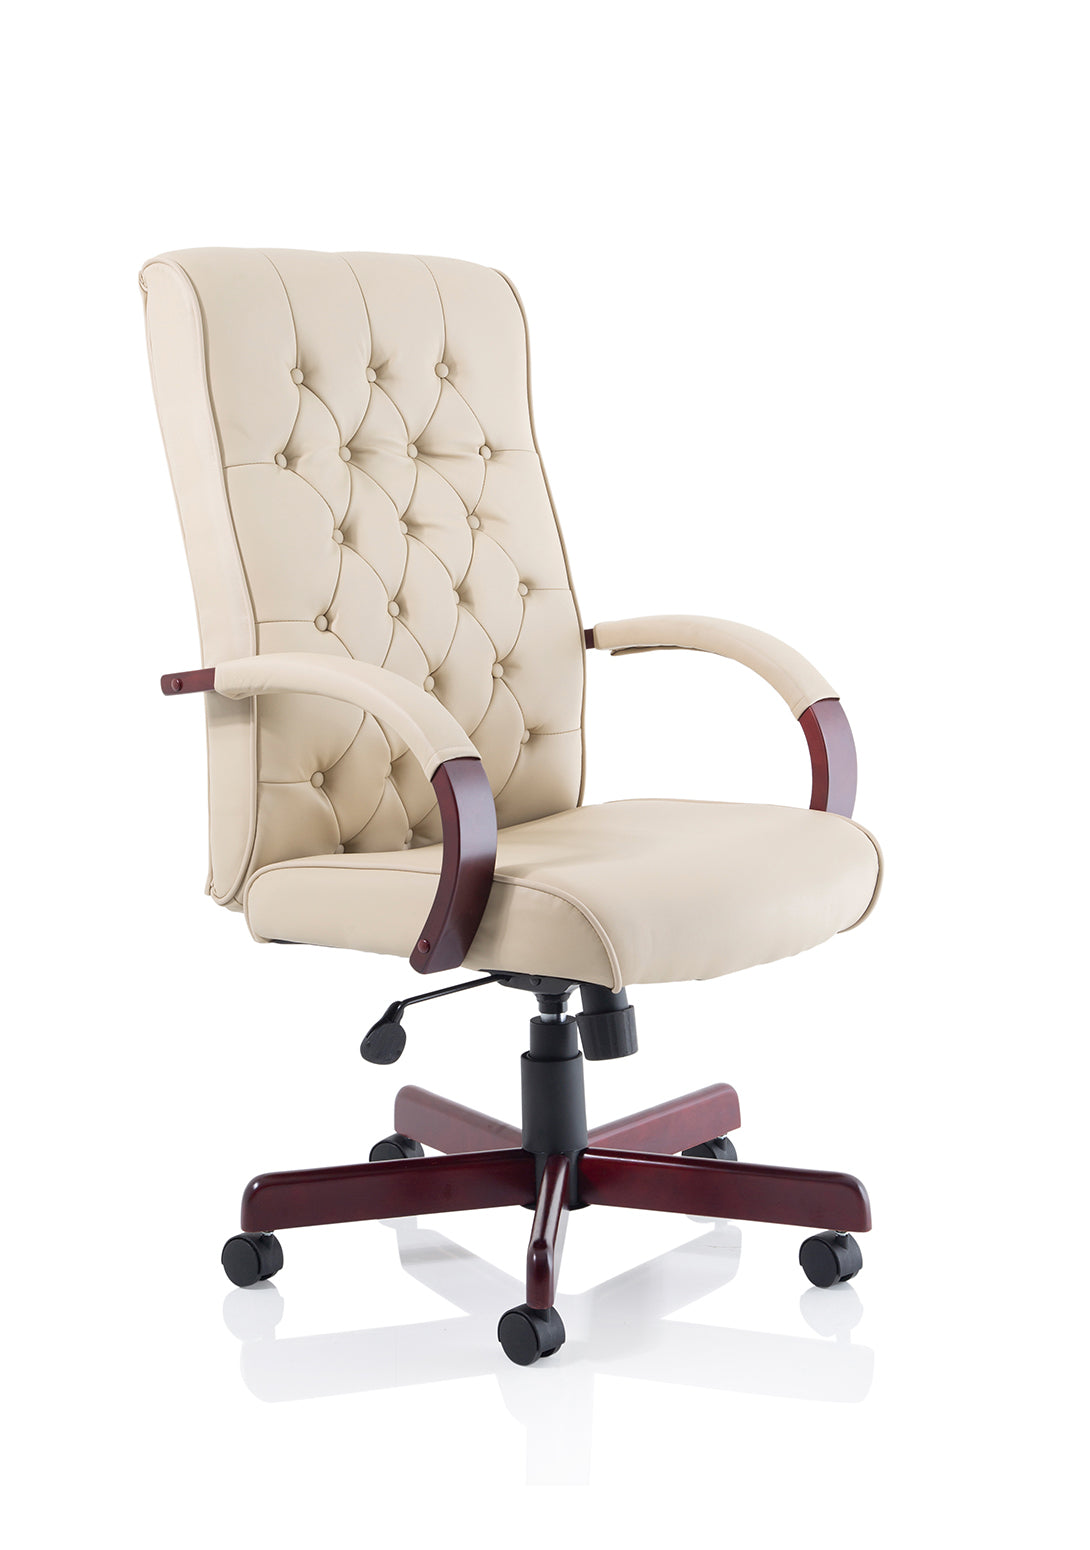 Chesterfield Leather Executive Chair Cream